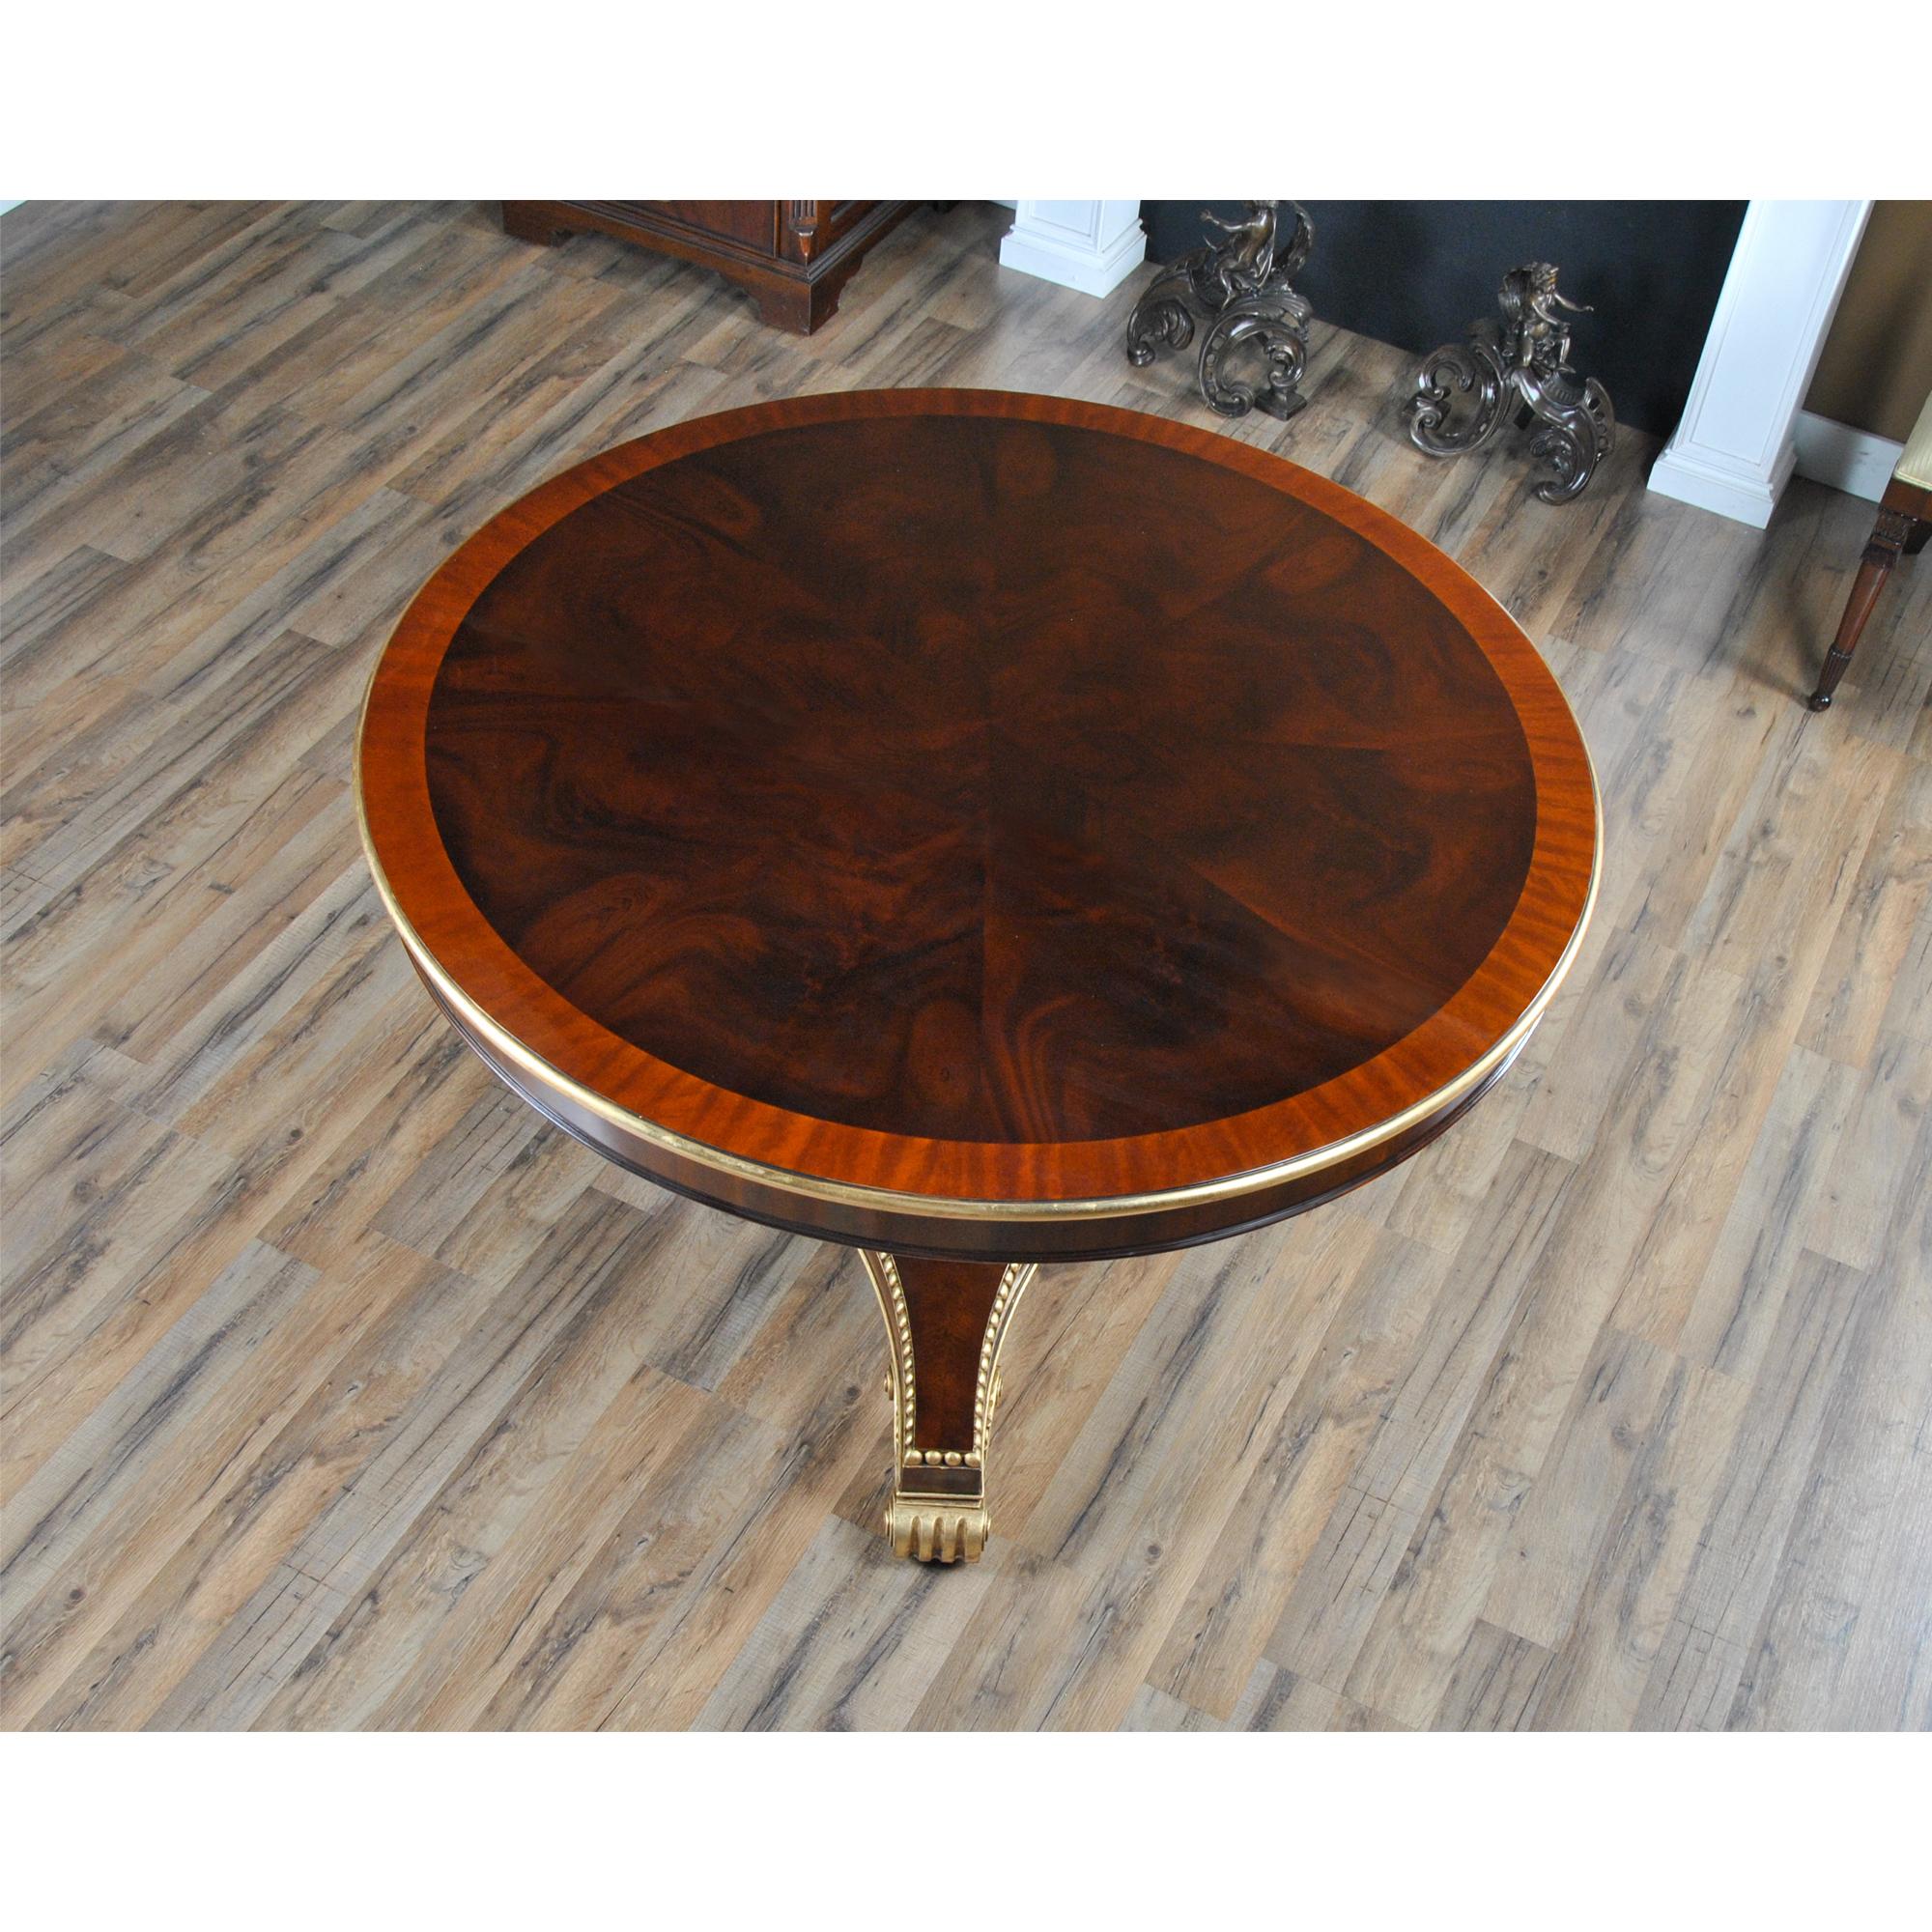 This 48 inch Round Dining Table is a great size to fit into many dining rooms and it can also fit well into the large entrance ways in many homes as well. A fantastic base with solid mahogany legs connects through the platform to the carved and